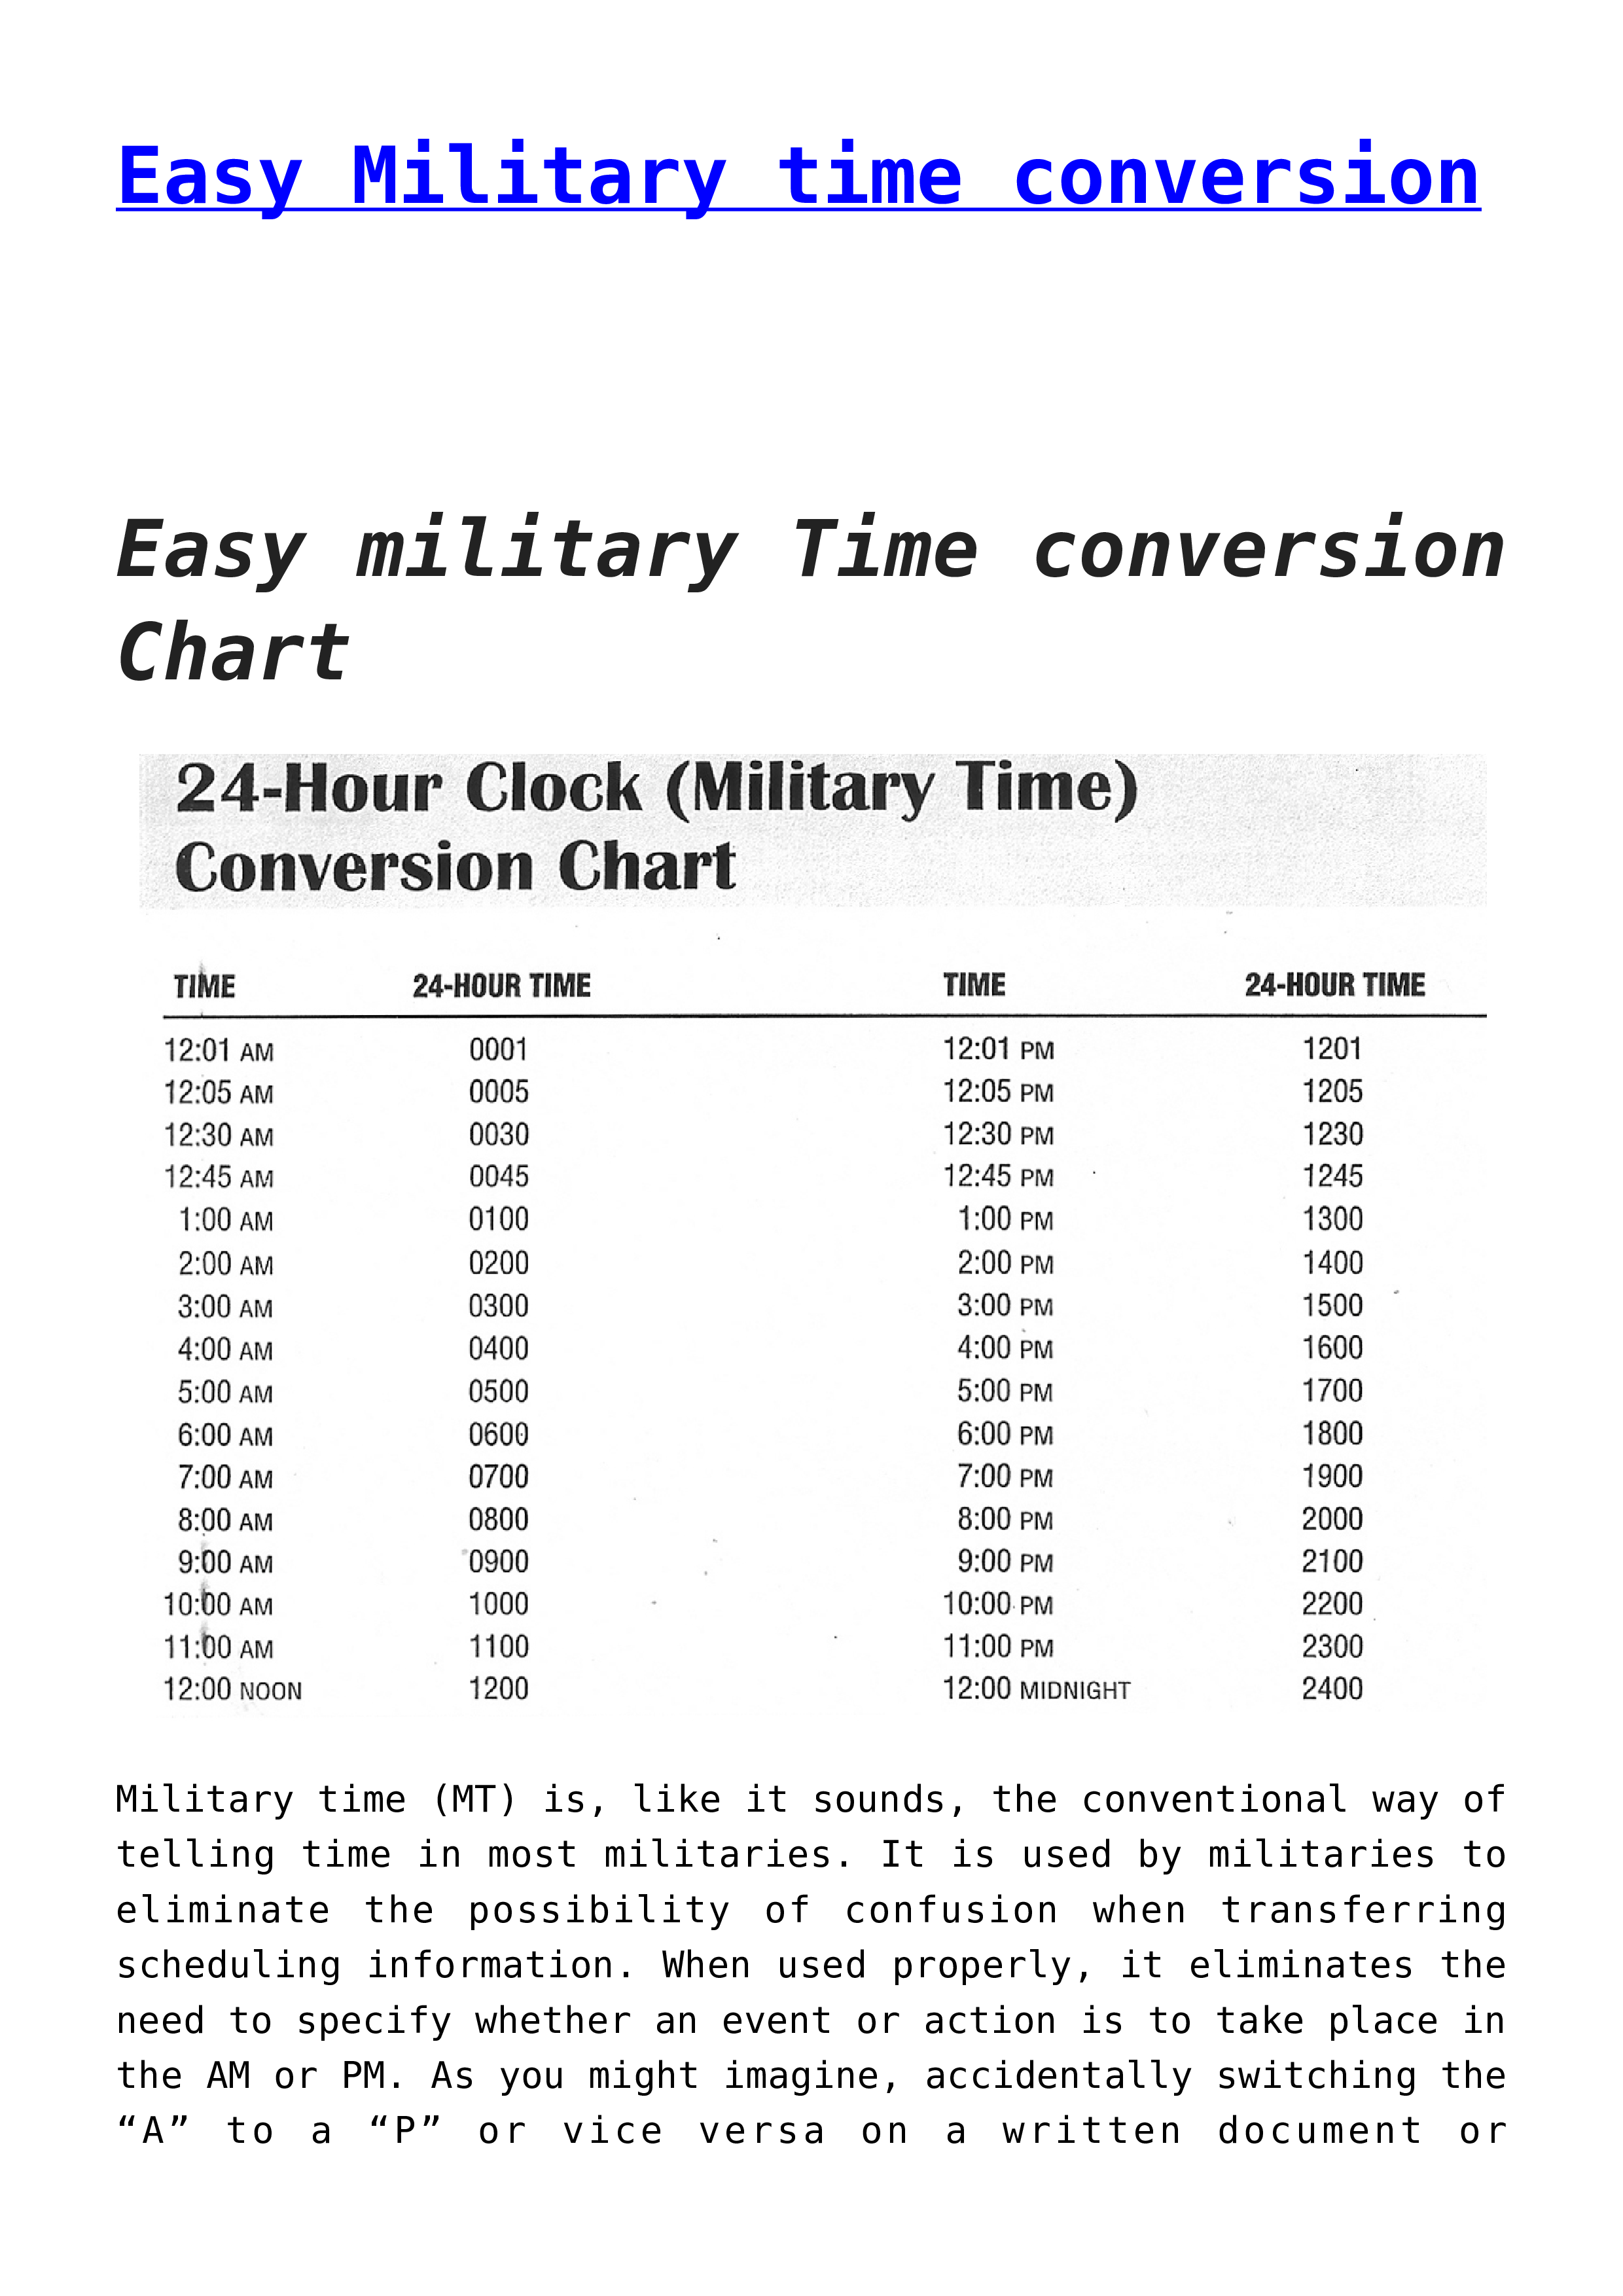 Easy Military Time Conversion Chart 模板